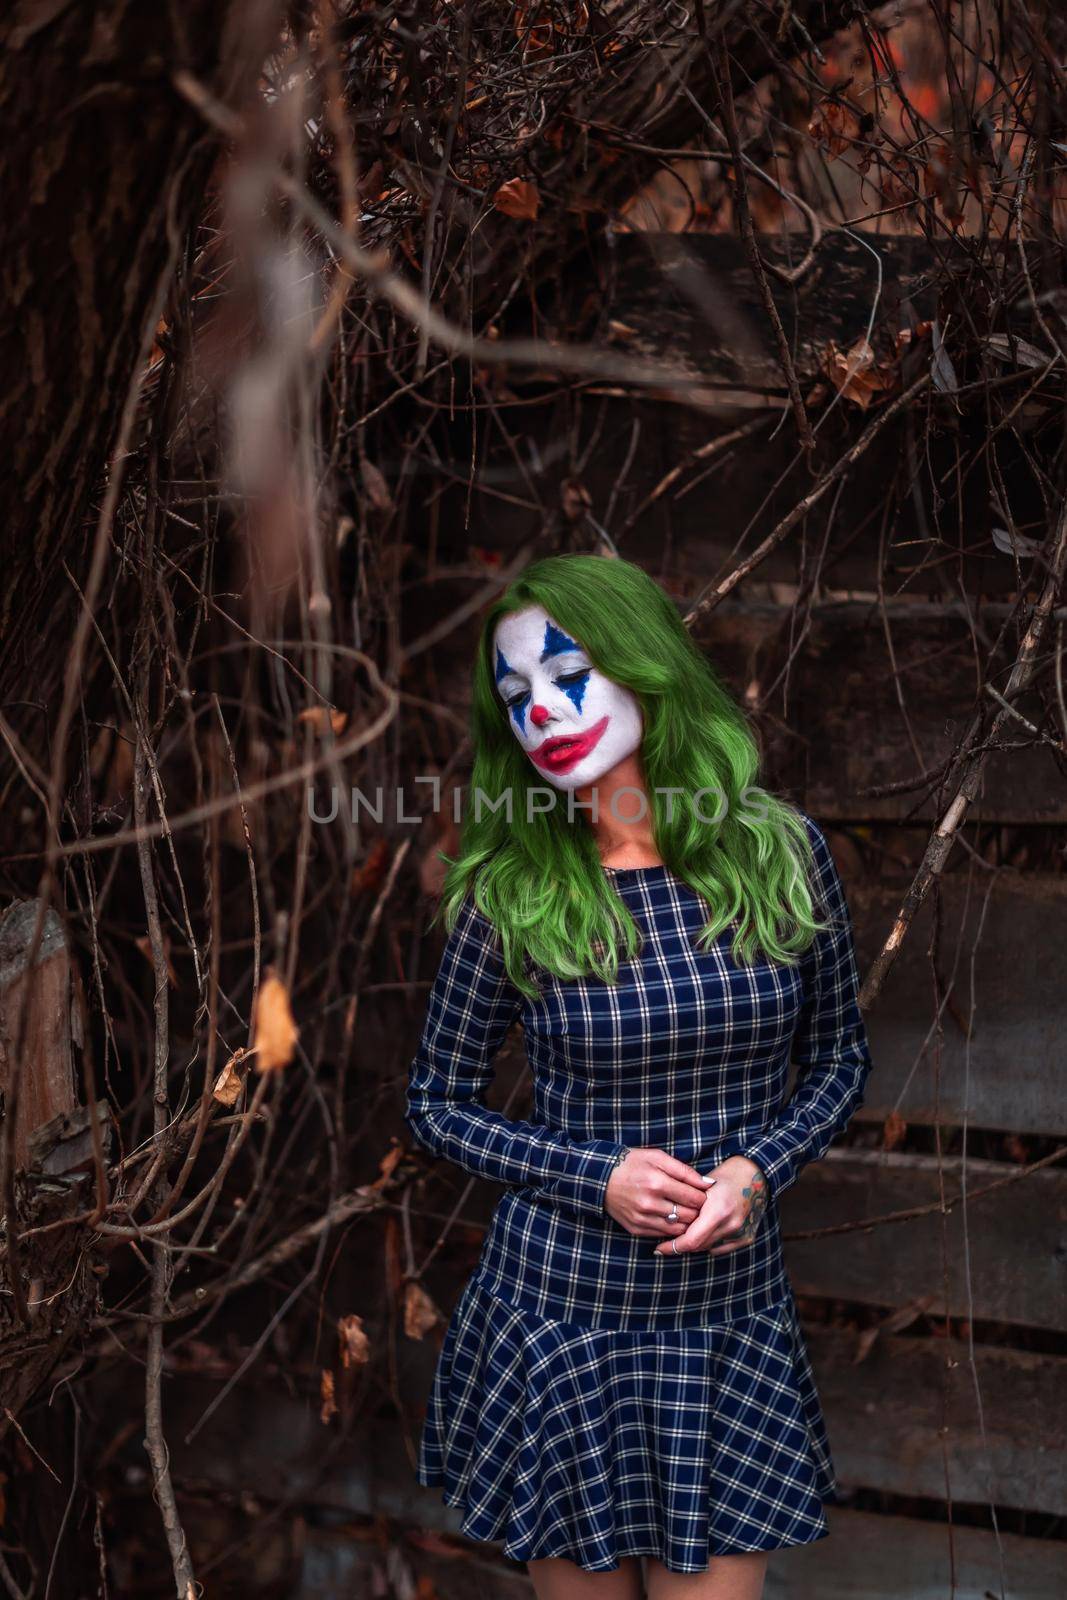 Portrait of a greenhaired girl in chekered dress with joker makeup on a atmospheric wooden background.